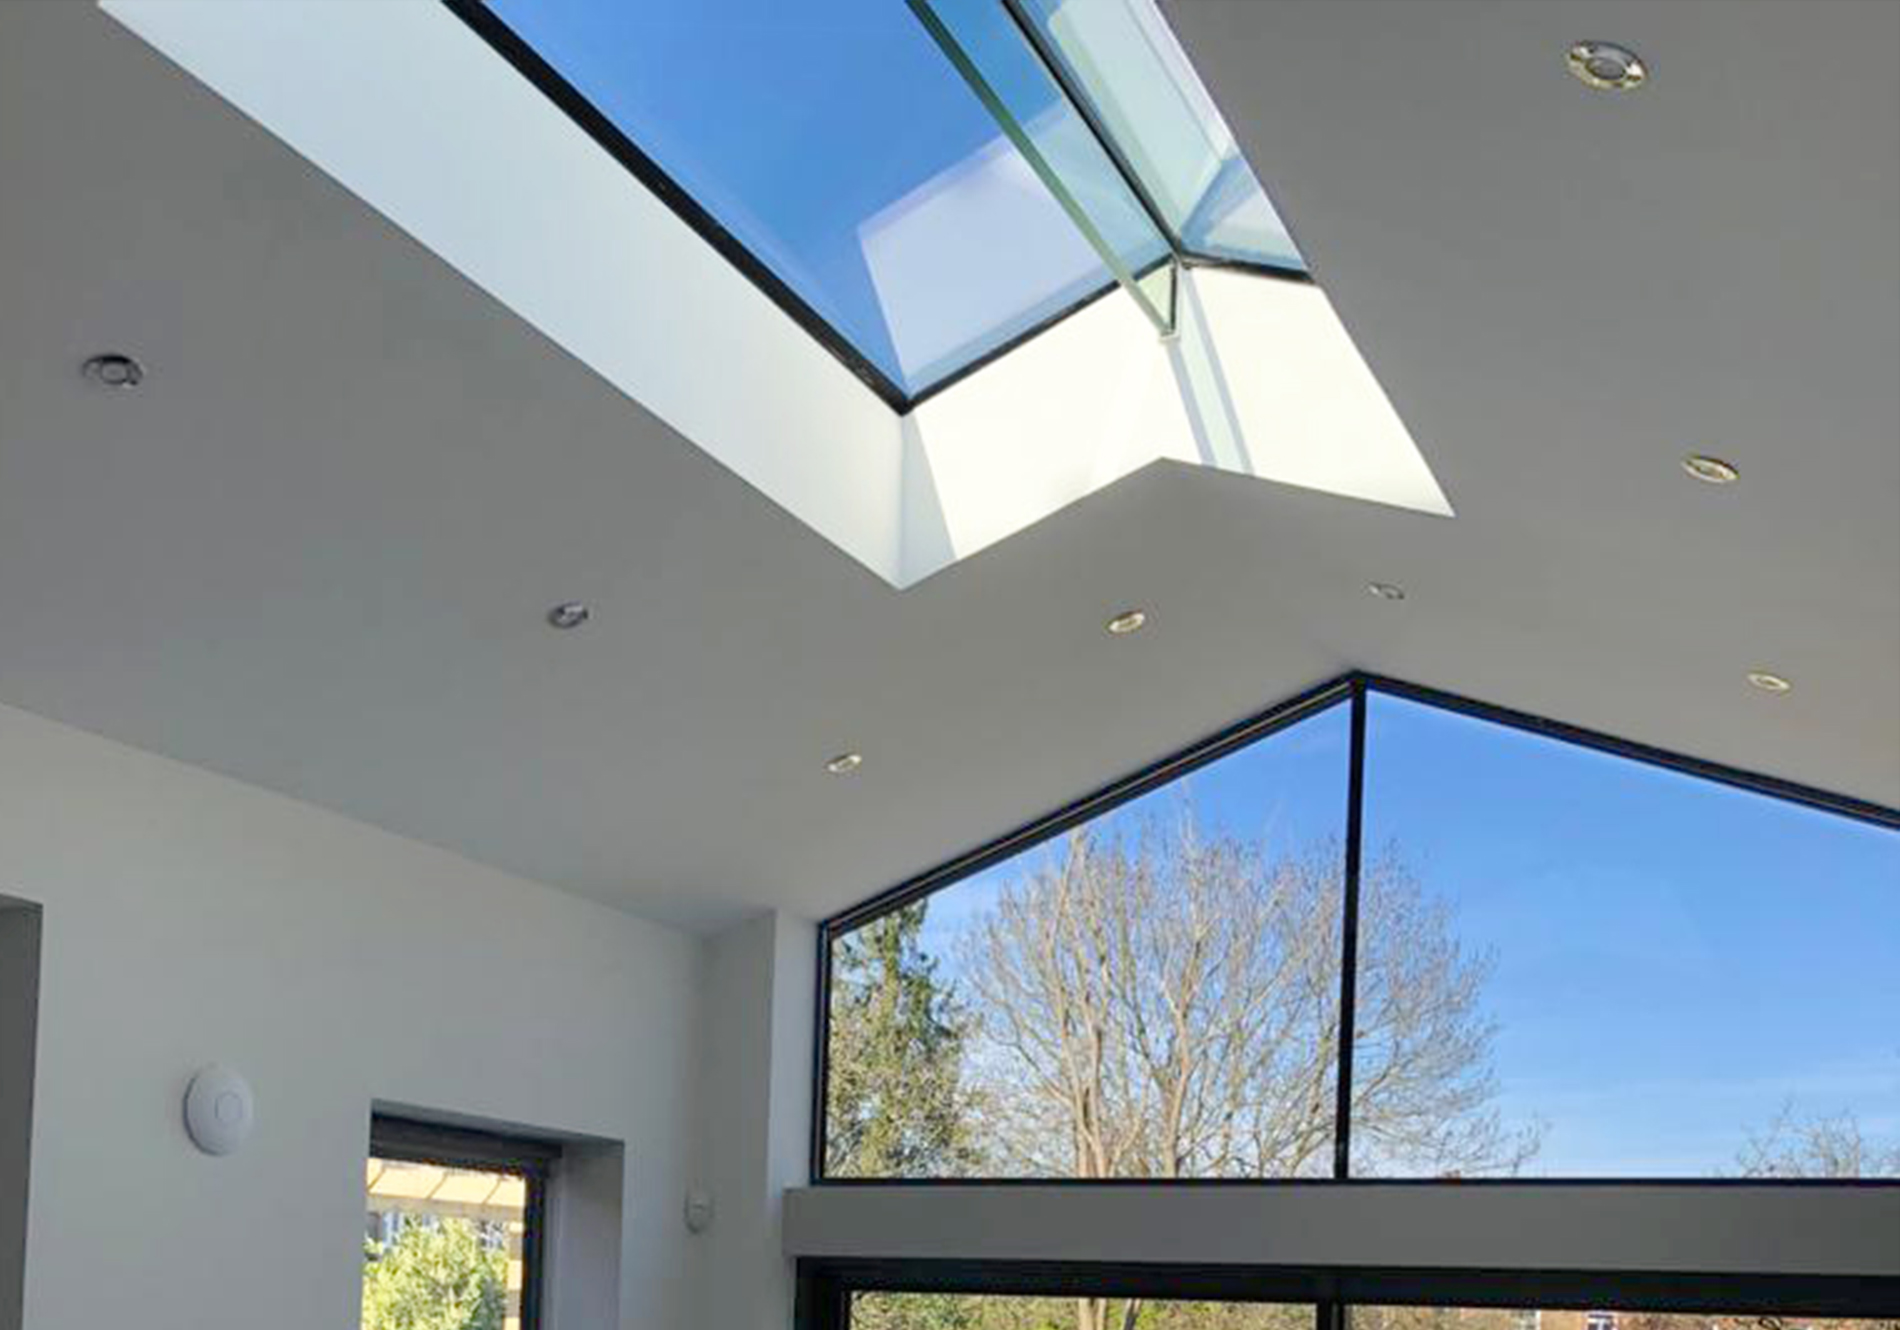 Have you considered a ridge light for your roof glazing?